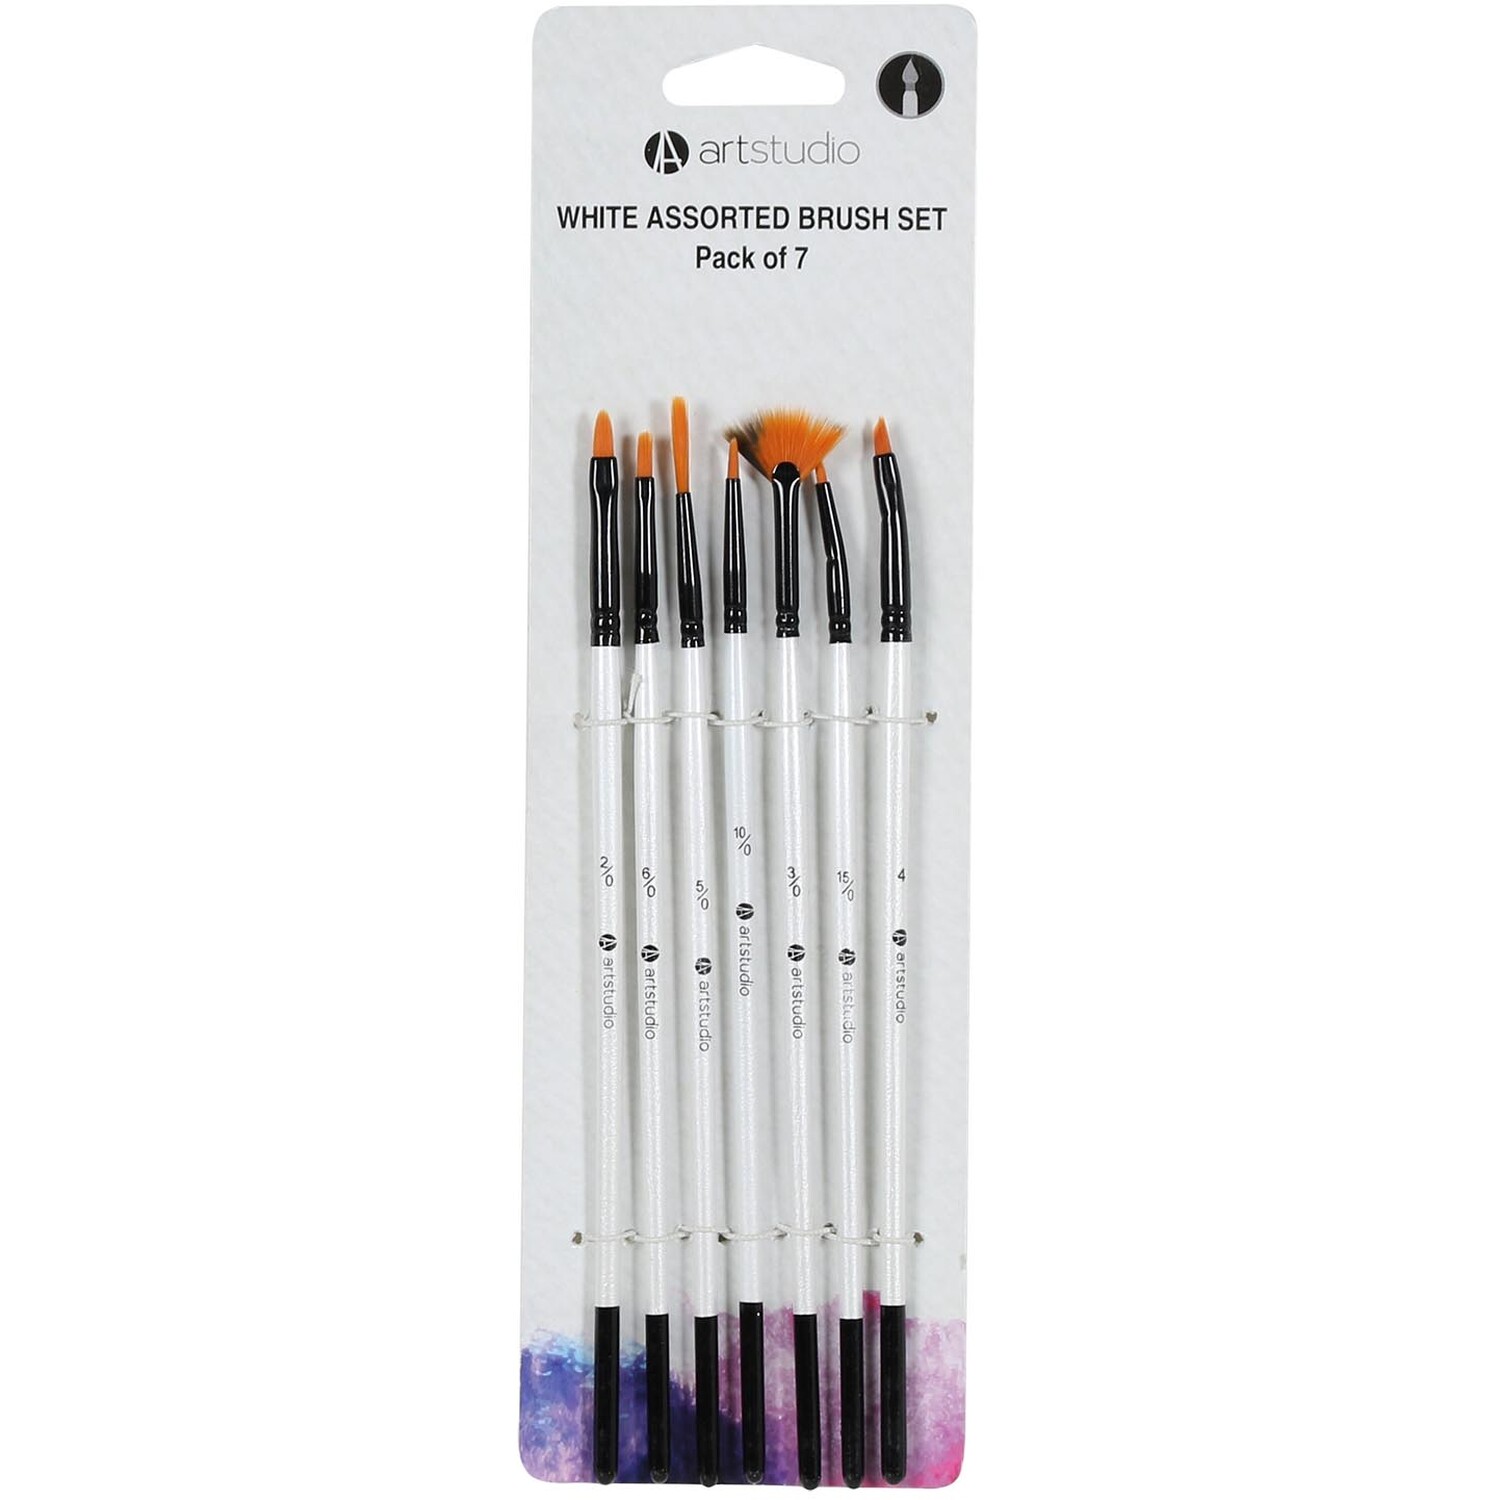 Pack of White Assorted Paint Brushes Image